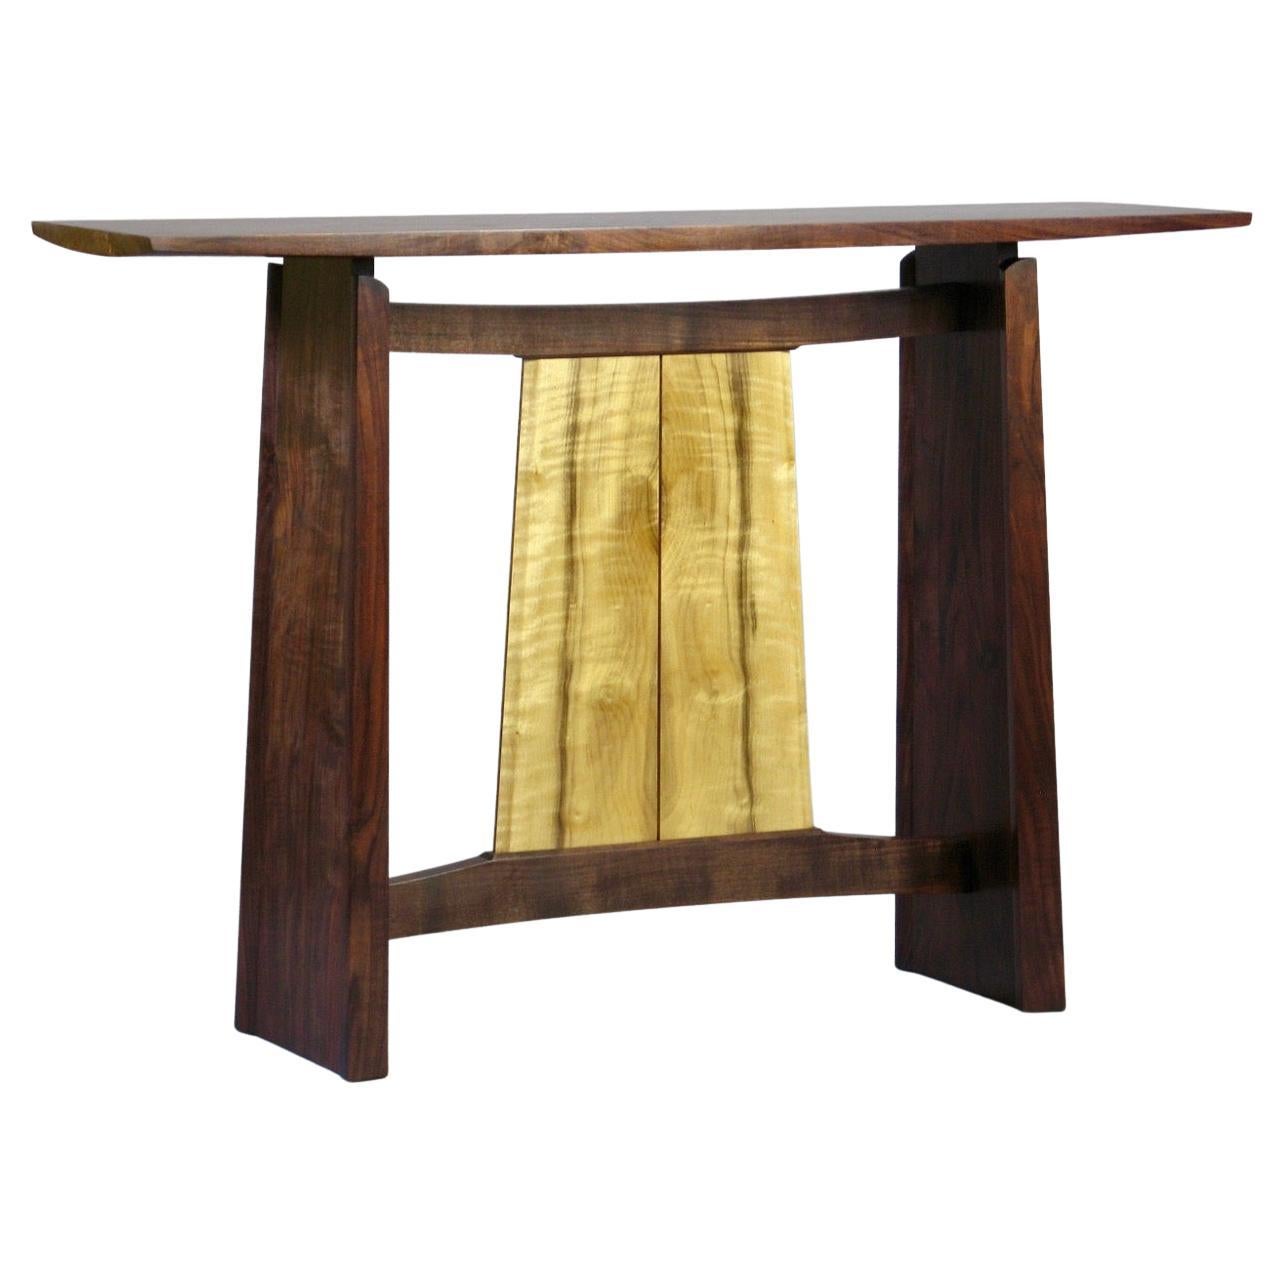 Walnut and Myrtle Console Table by Thomas Throop/ Black Creek Designs - In Stock For Sale